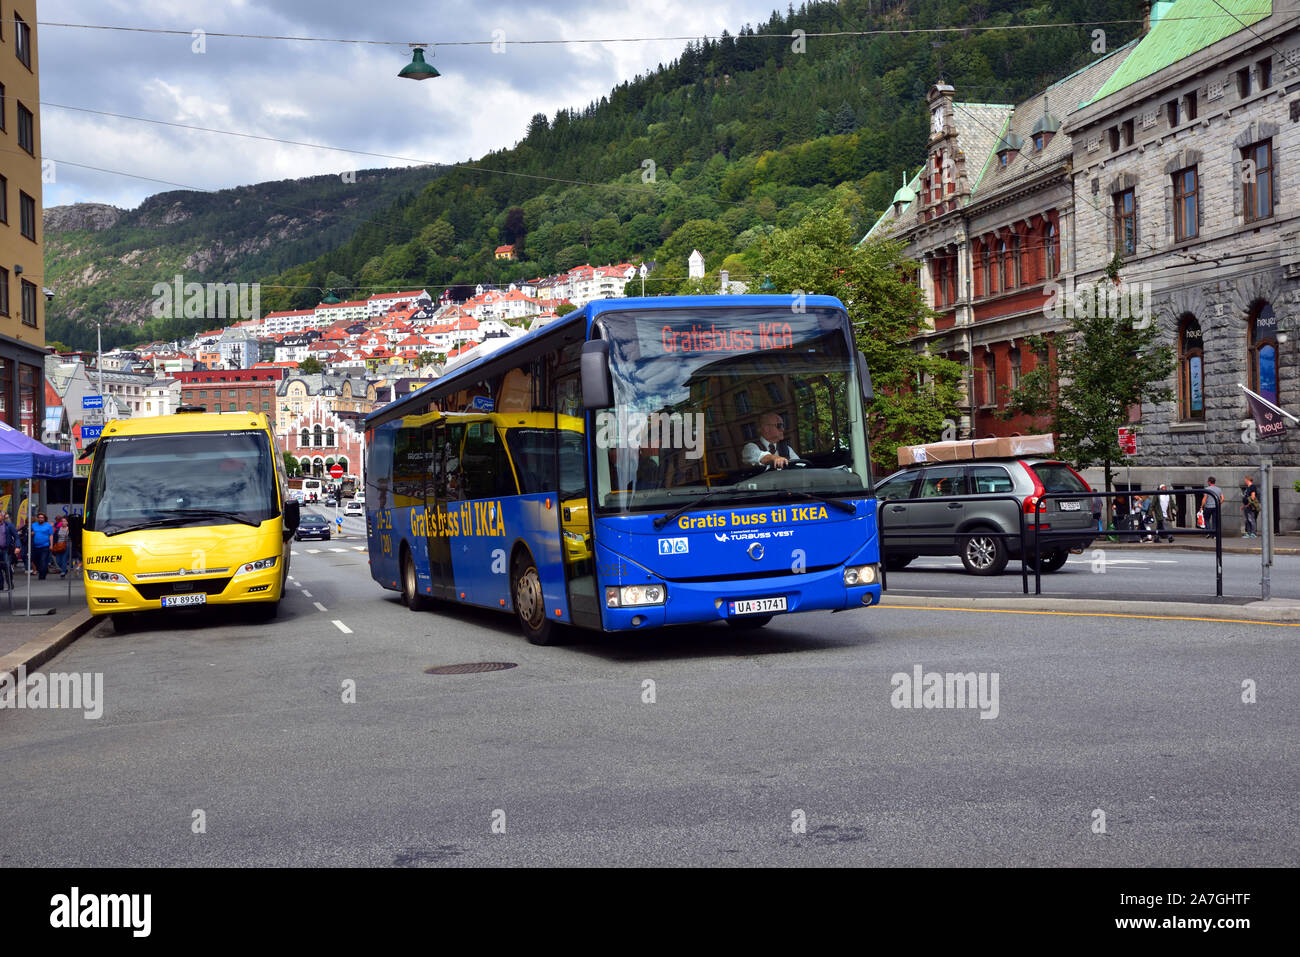 A Tide Buss Irisbus, operated under the Turbuss Vest brand and in IKEA free  bus livery, is seen turning from Strandgaten into Torgallmenningen in Berg  Stock Photo - Alamy